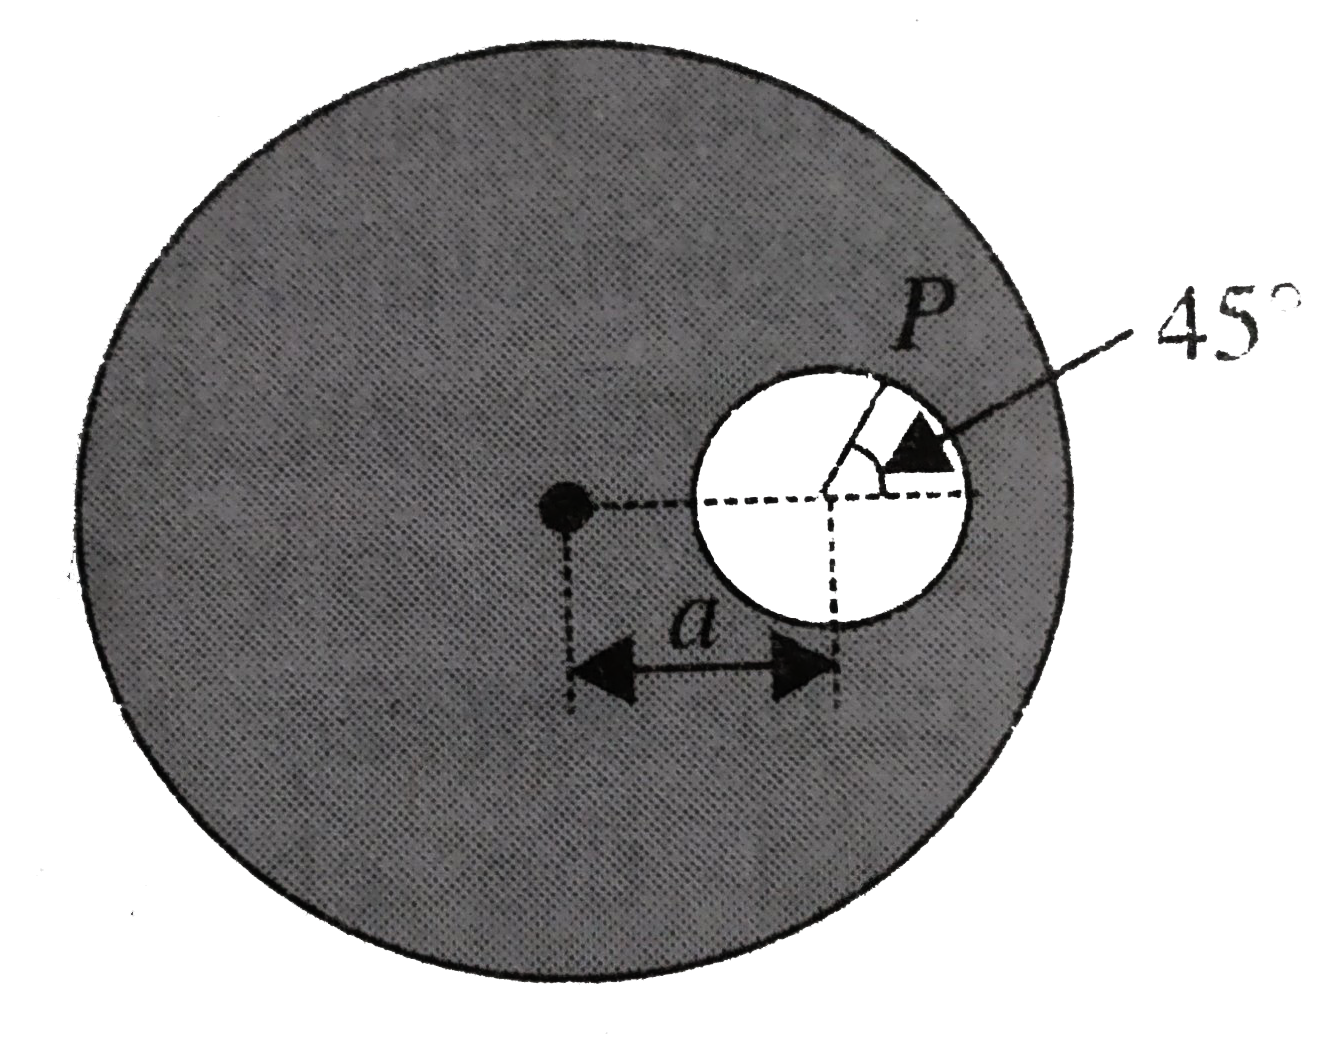 A cavity of radius r is made inside  a  solid sphere. The volume charge density of the remaining sphere is rho. An electron (charge e, mass m) is released inside the cavity from point P as shown in figure. The centre of sphere and center of cavity are separated by a distance a. The time after which the electron again touches the sphere is